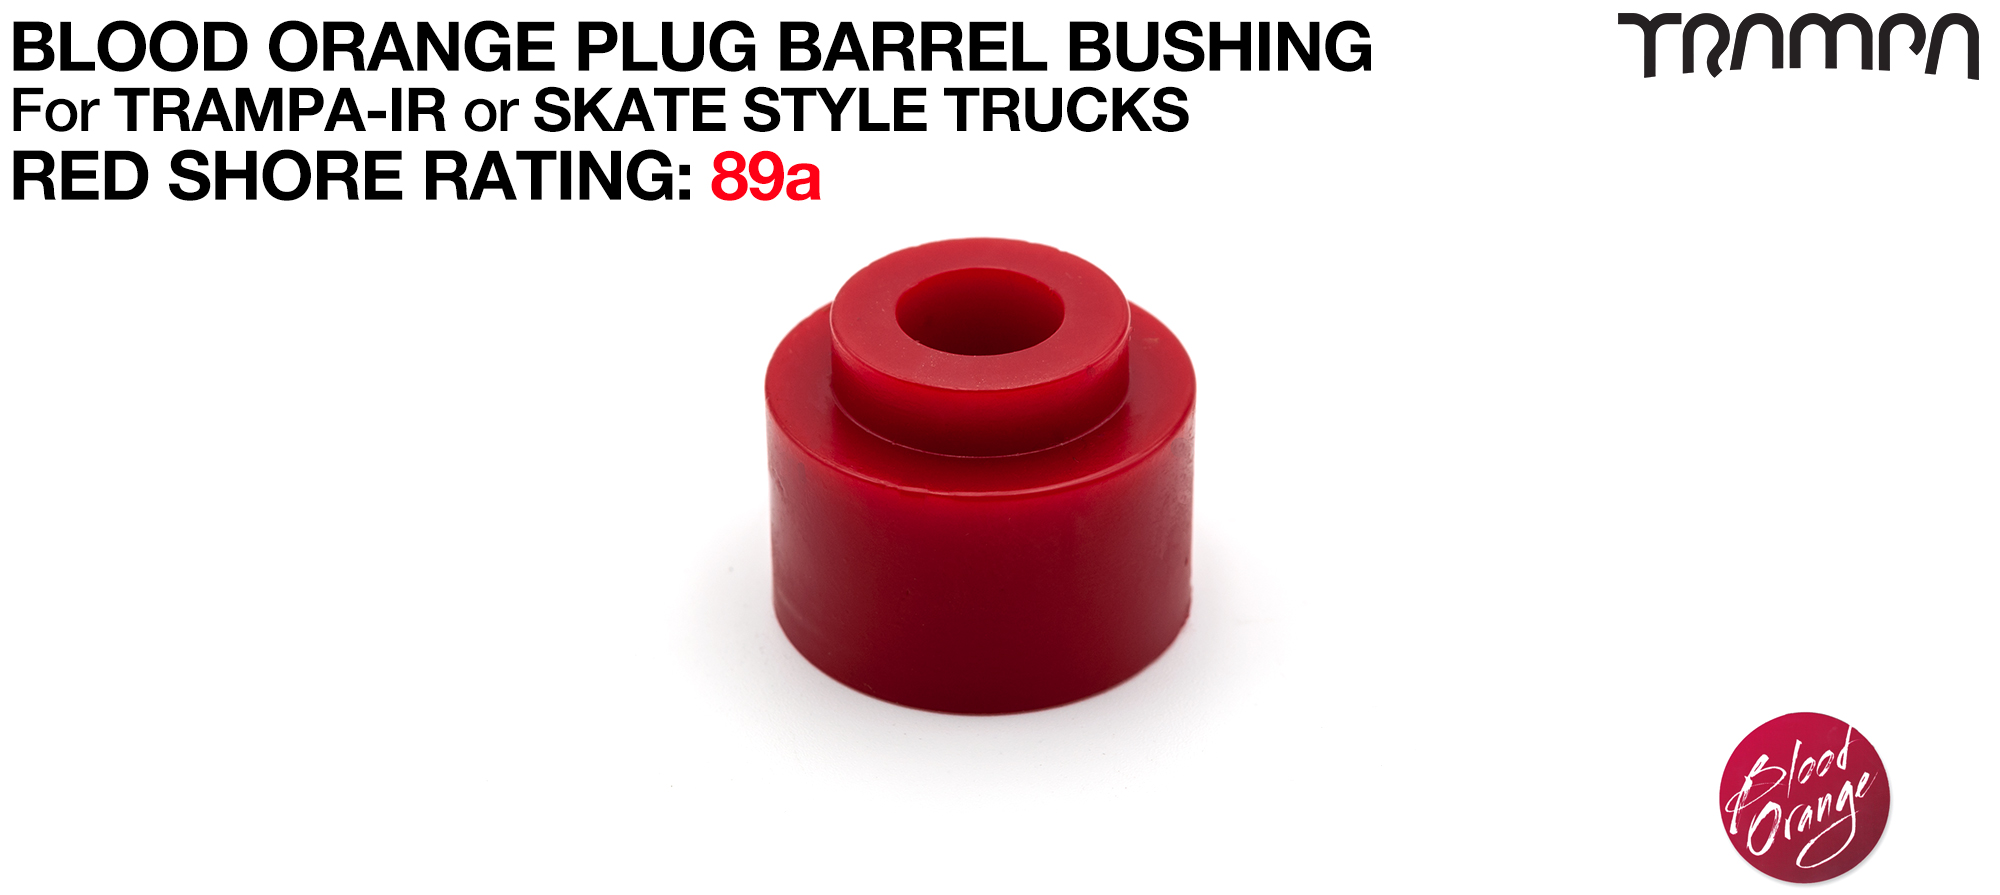 PLUG BARREL Bushings RED - 86a  - OUT OF STOCK